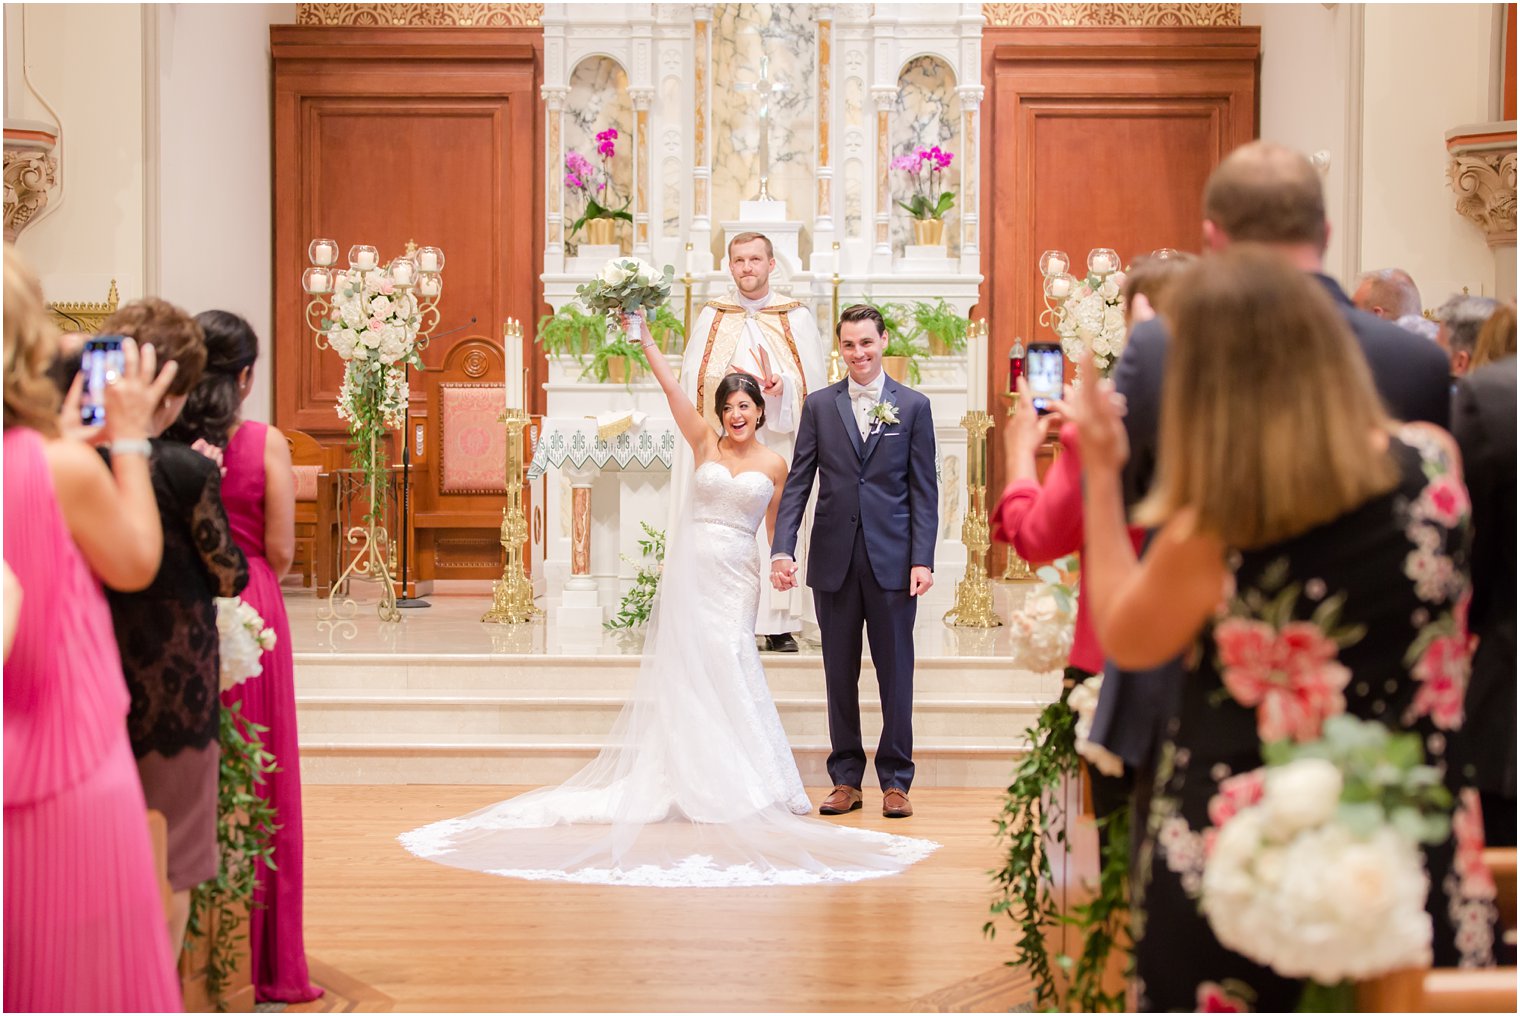 bride and groom celebrate marriage in NJ church photographed by Idalia Photography